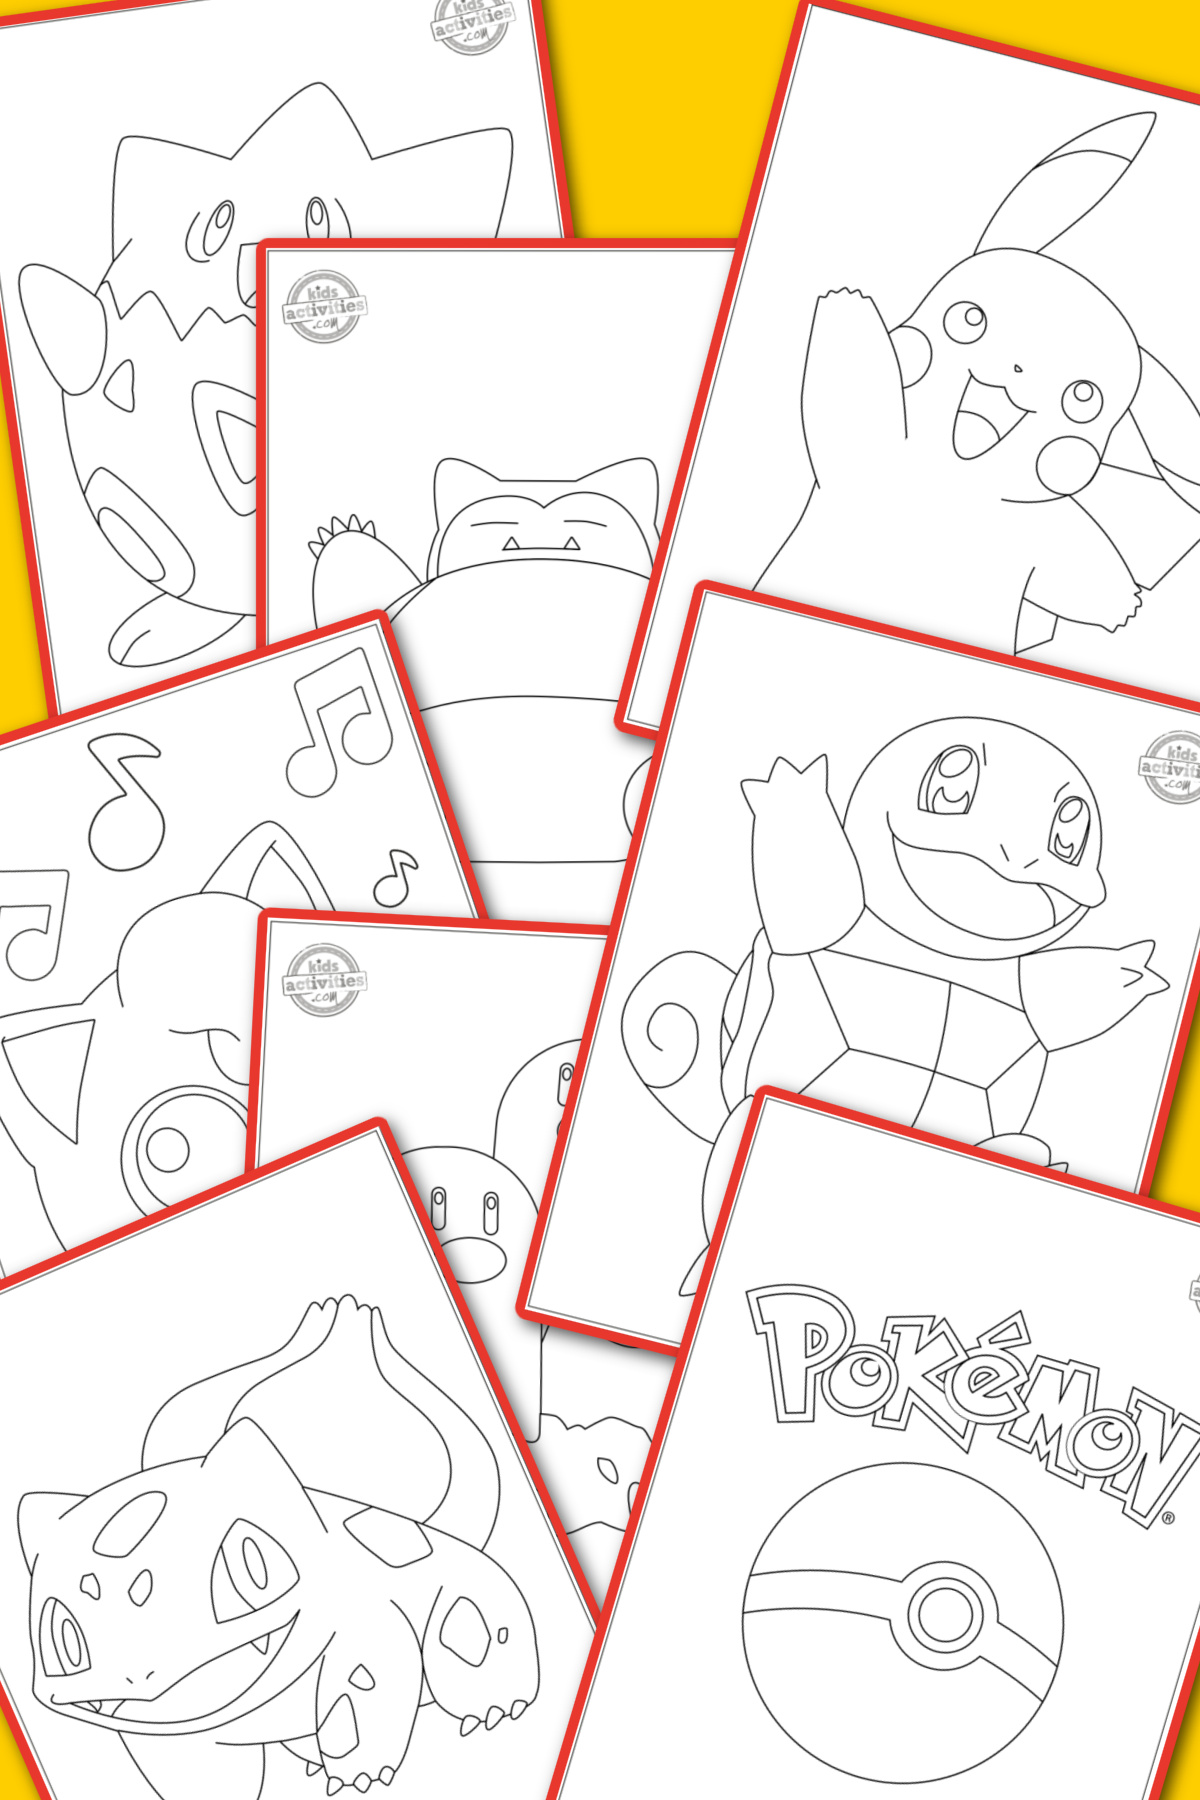 Best free printable pokemon coloring pages â kids activities blog